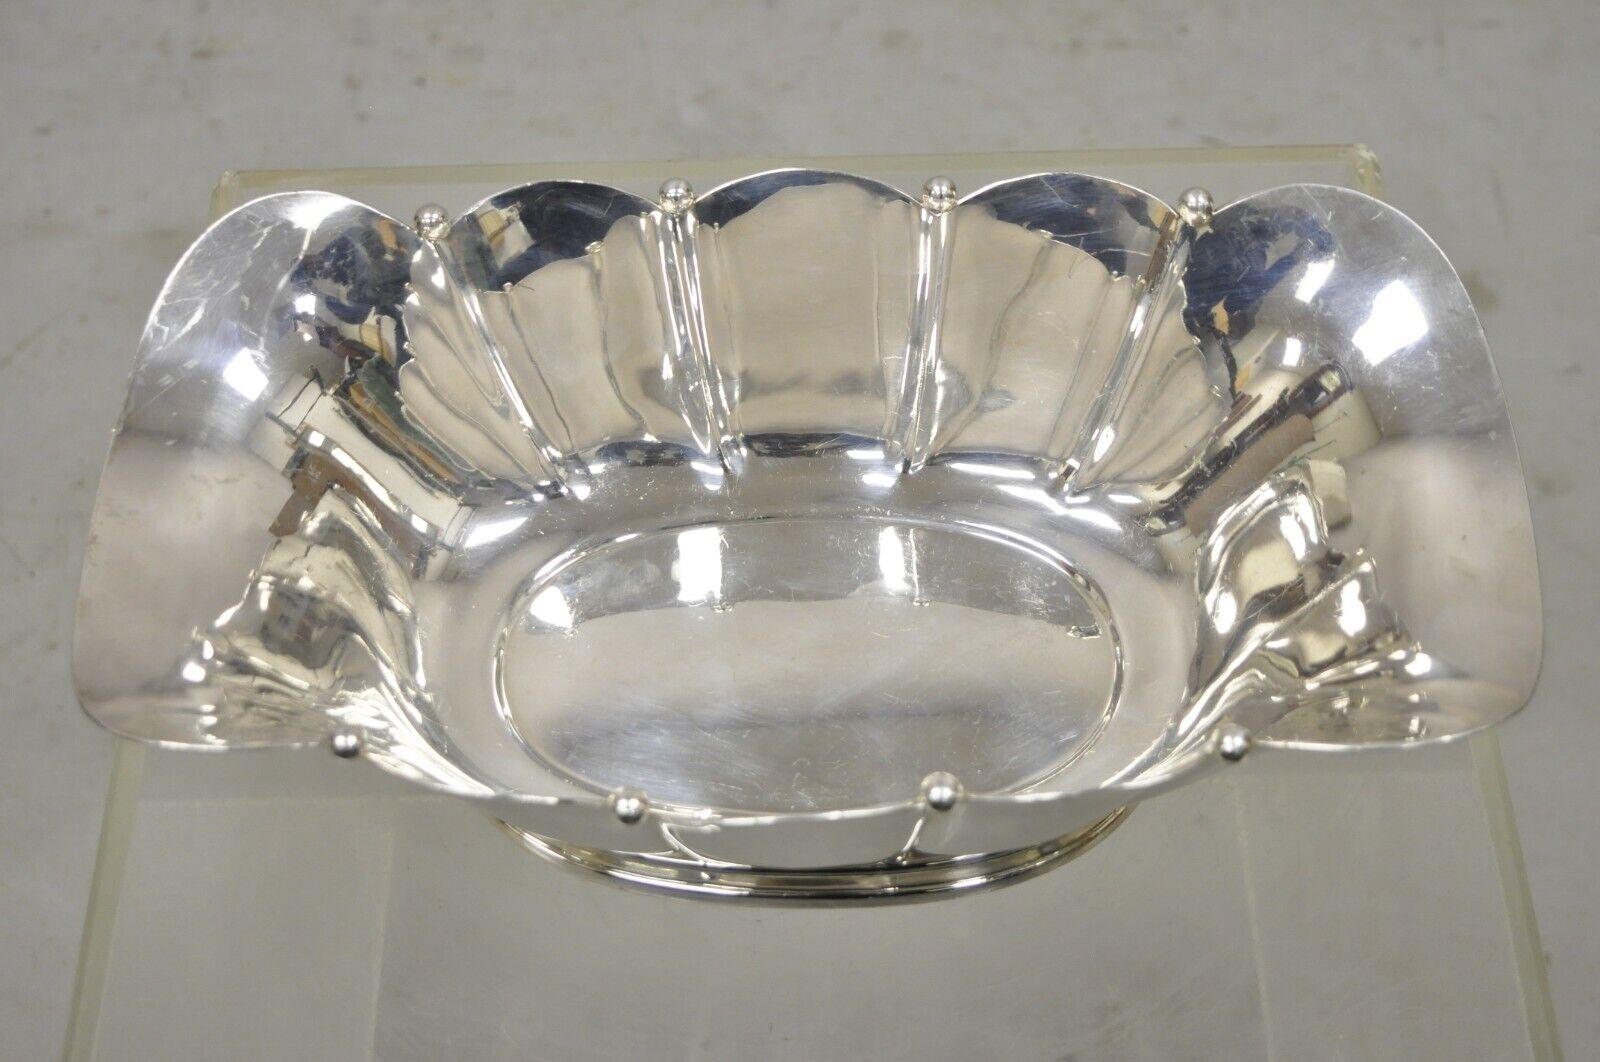 Vintage Reed & Barton Silver Plated Scalloped Fluted Large Fruit Bowl Dish im Zustand „Gut“ im Angebot in Philadelphia, PA